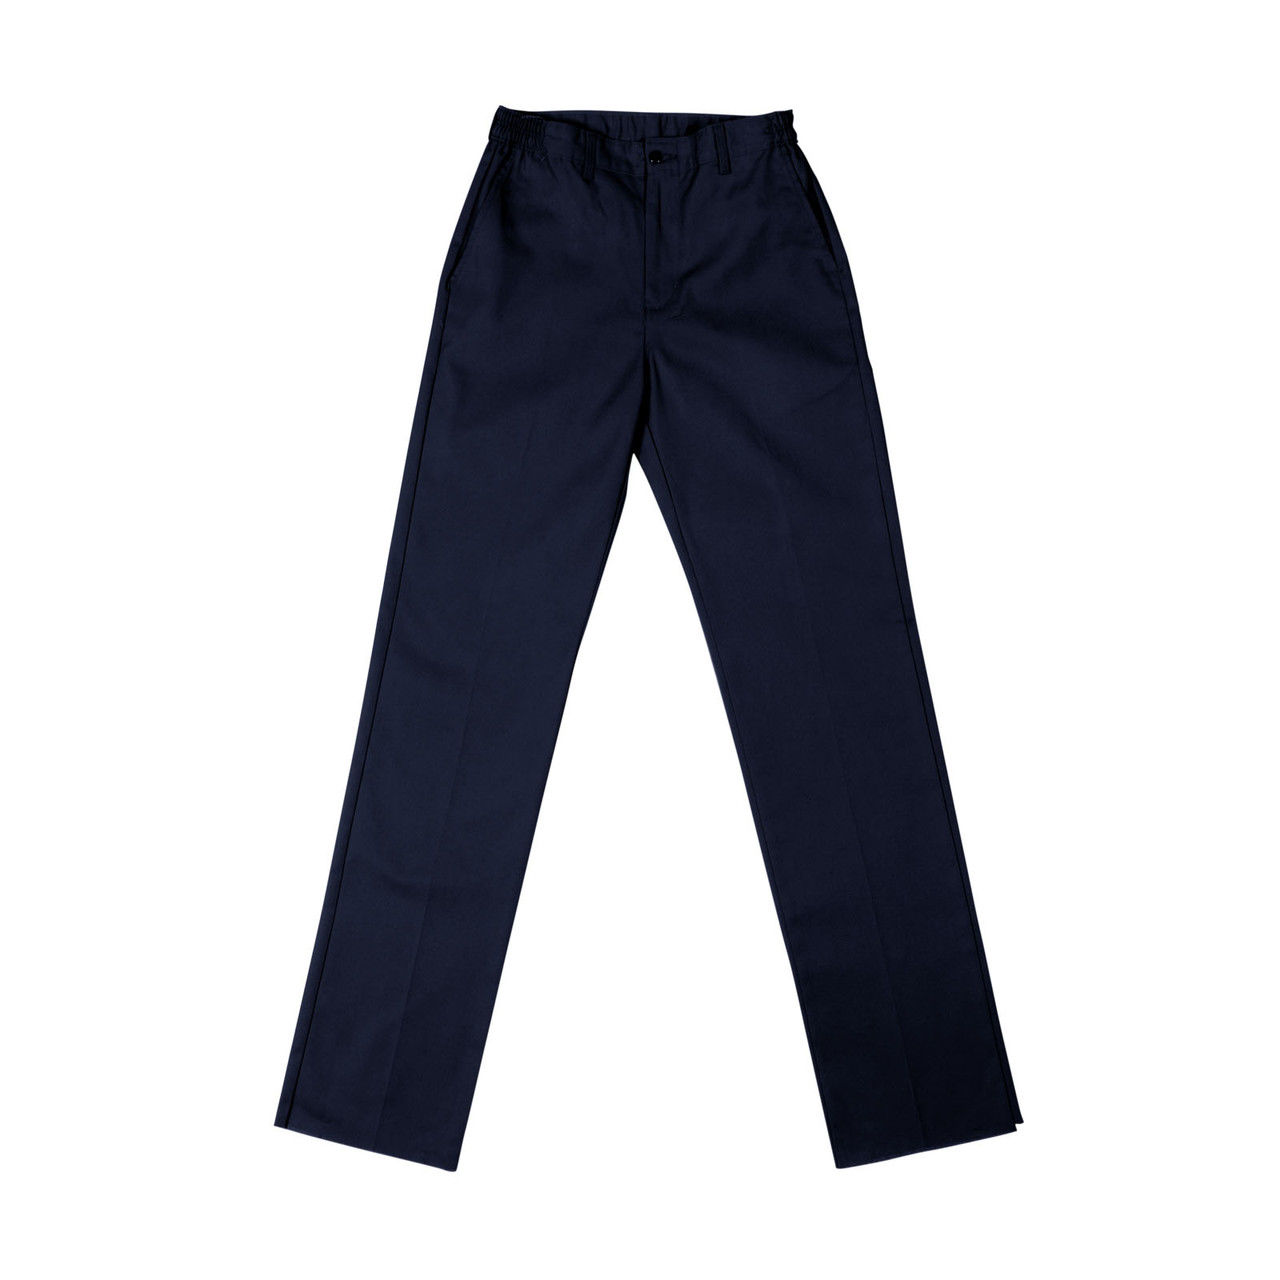 What is the design of the P26 navy blue work pants for women with a comfort fit flex-waist?